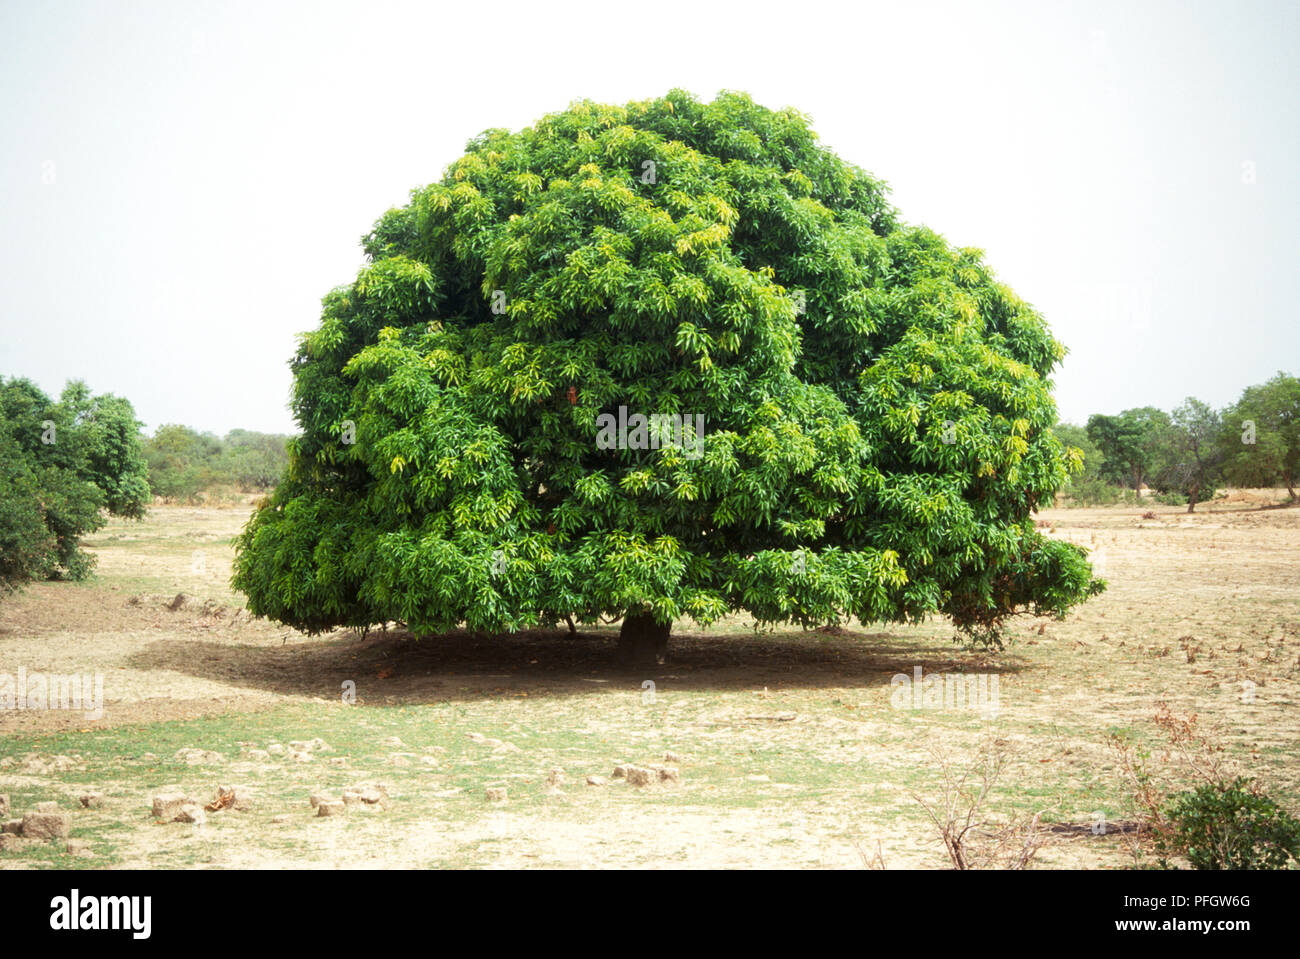 Indian mango tree (Mangifera indica) covered in lush green leaves, on sandy soil Stock Photo